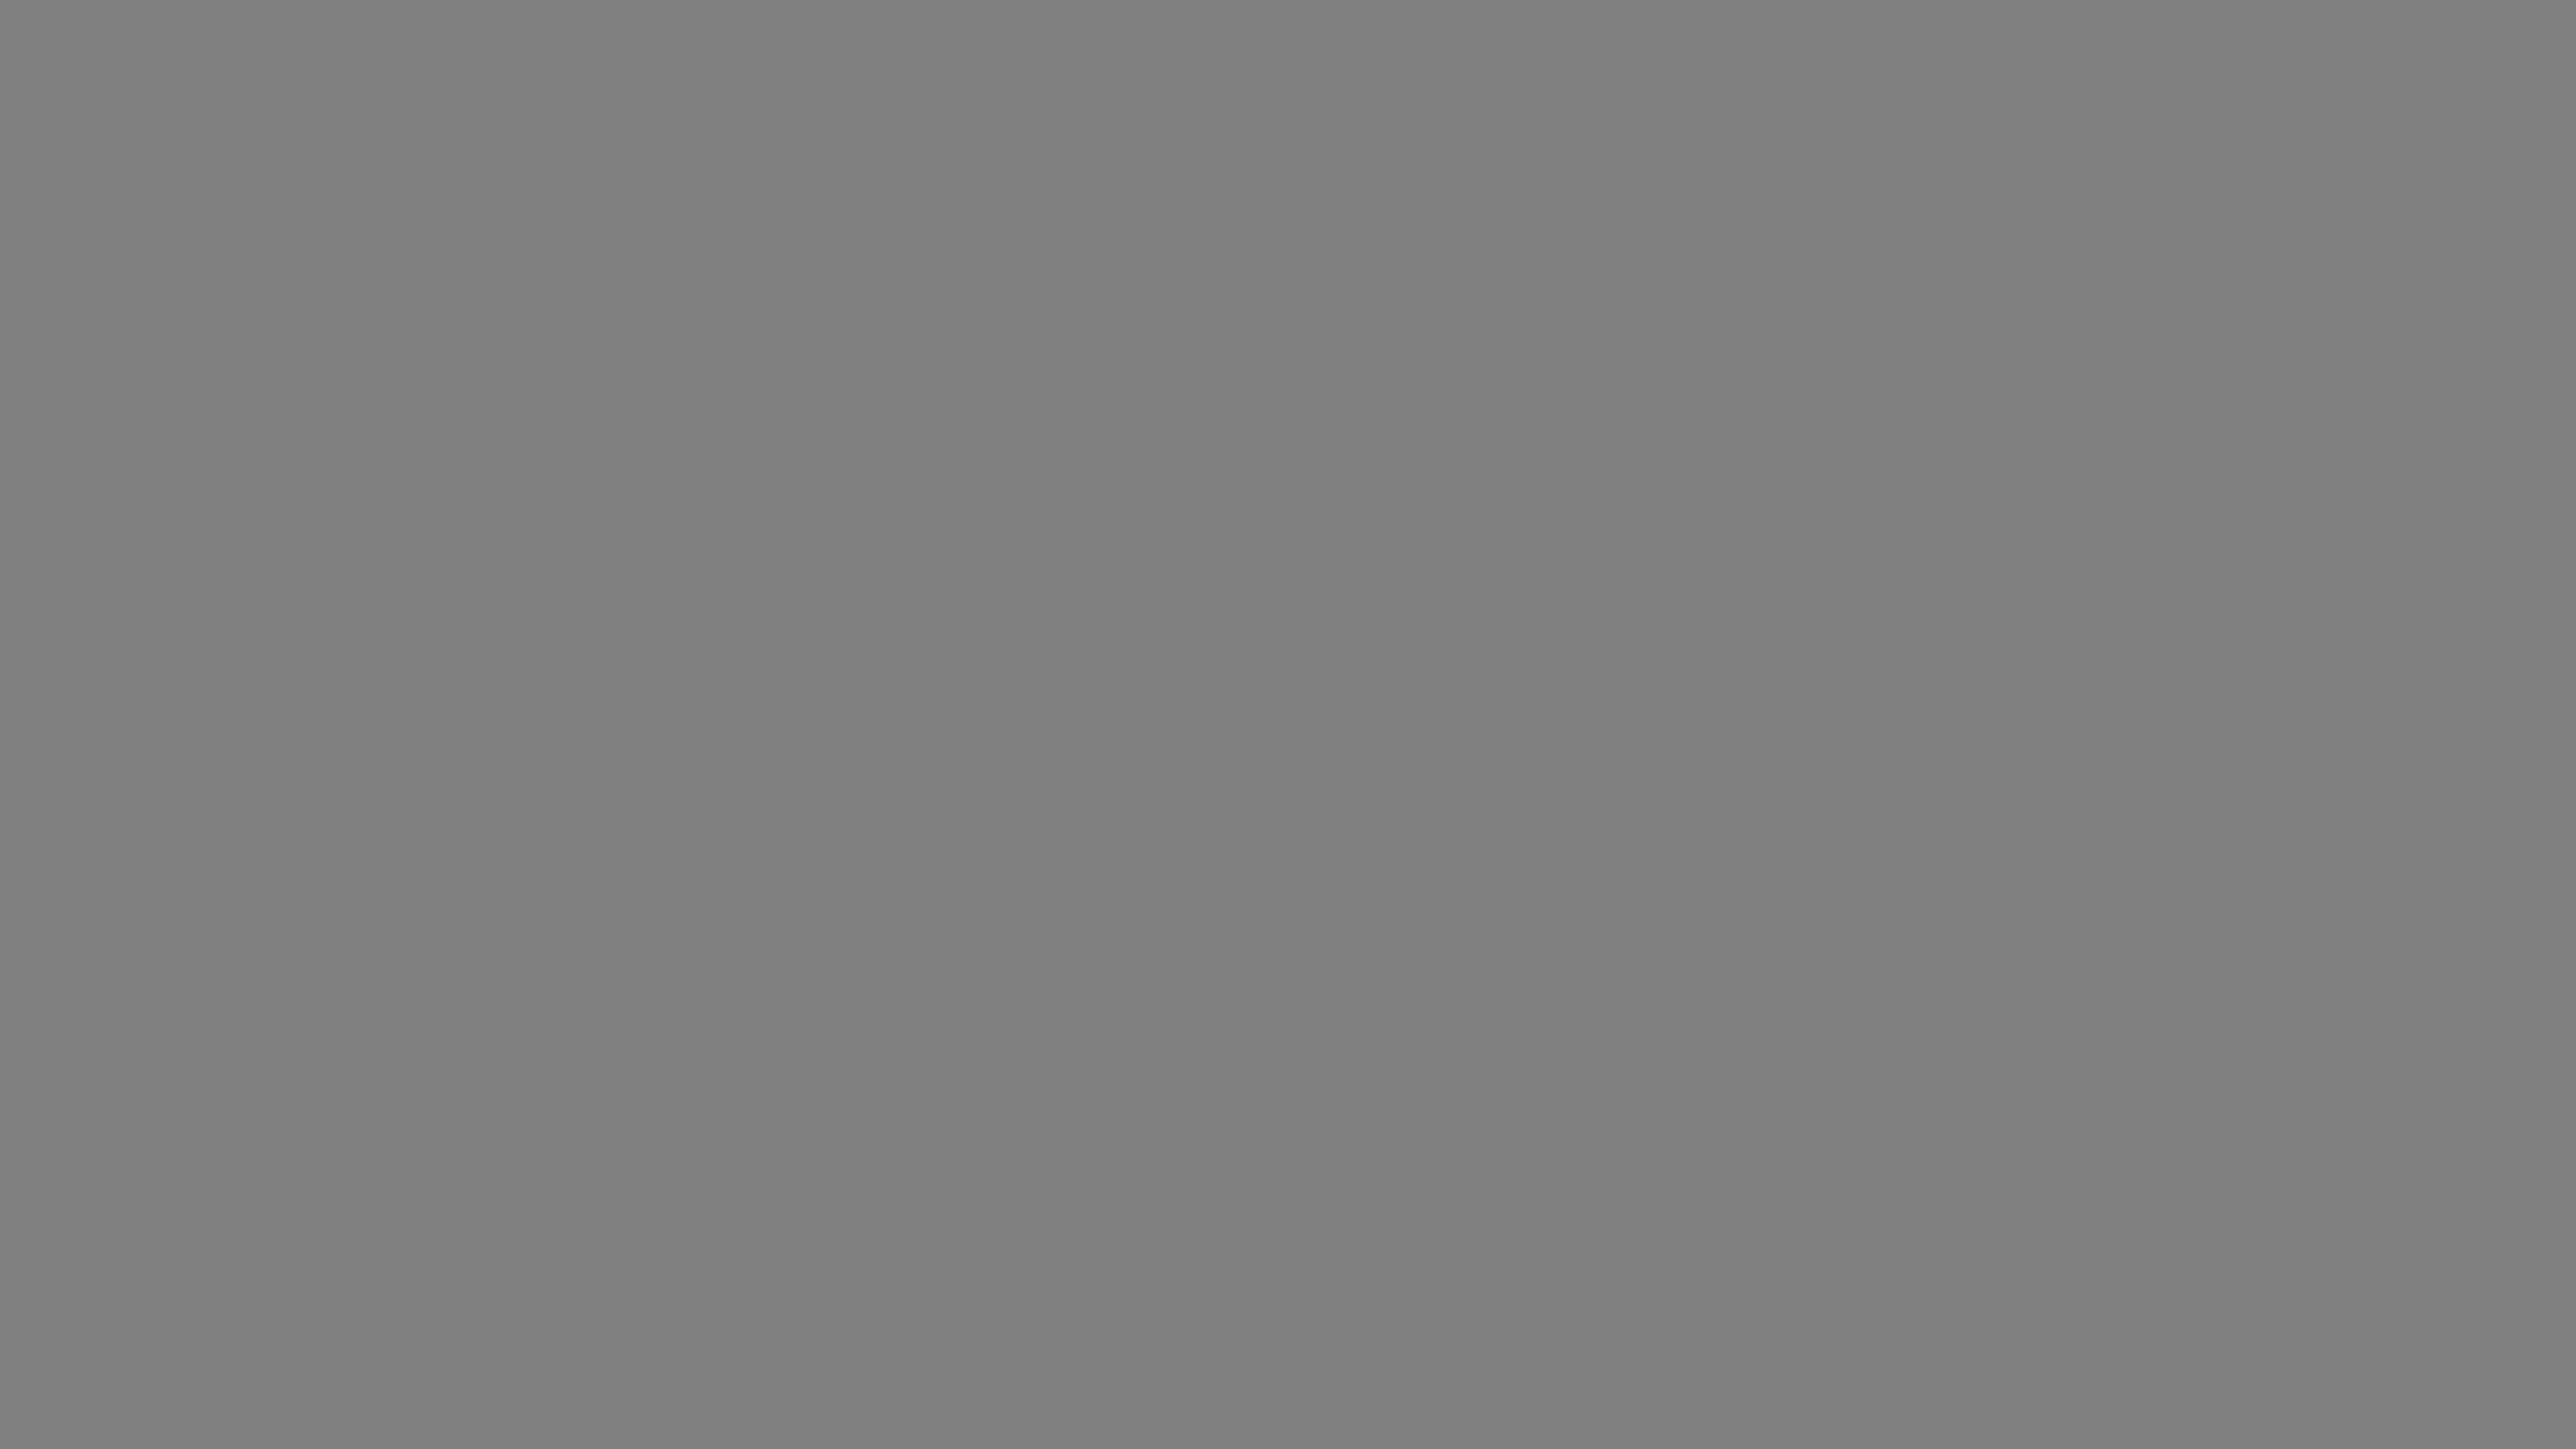 7680x4320 Gray Web Gray Solid Color Background